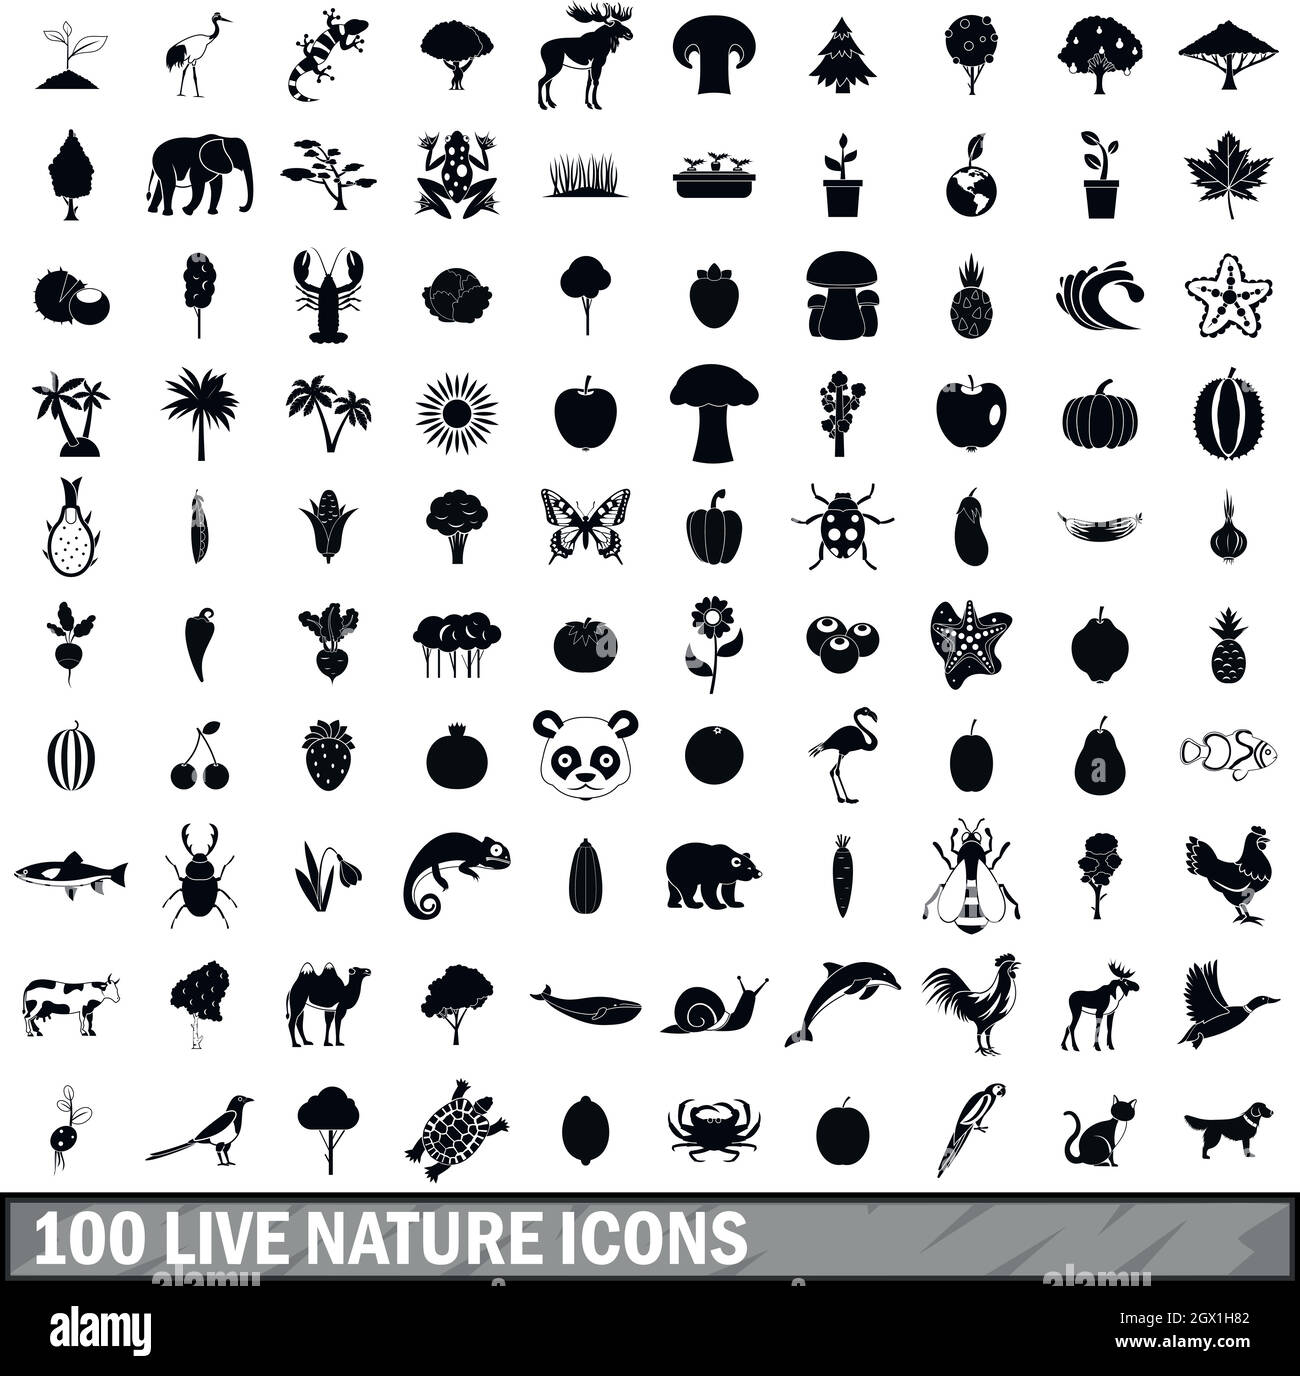 100 live nature icons set in simple style Stock Vector